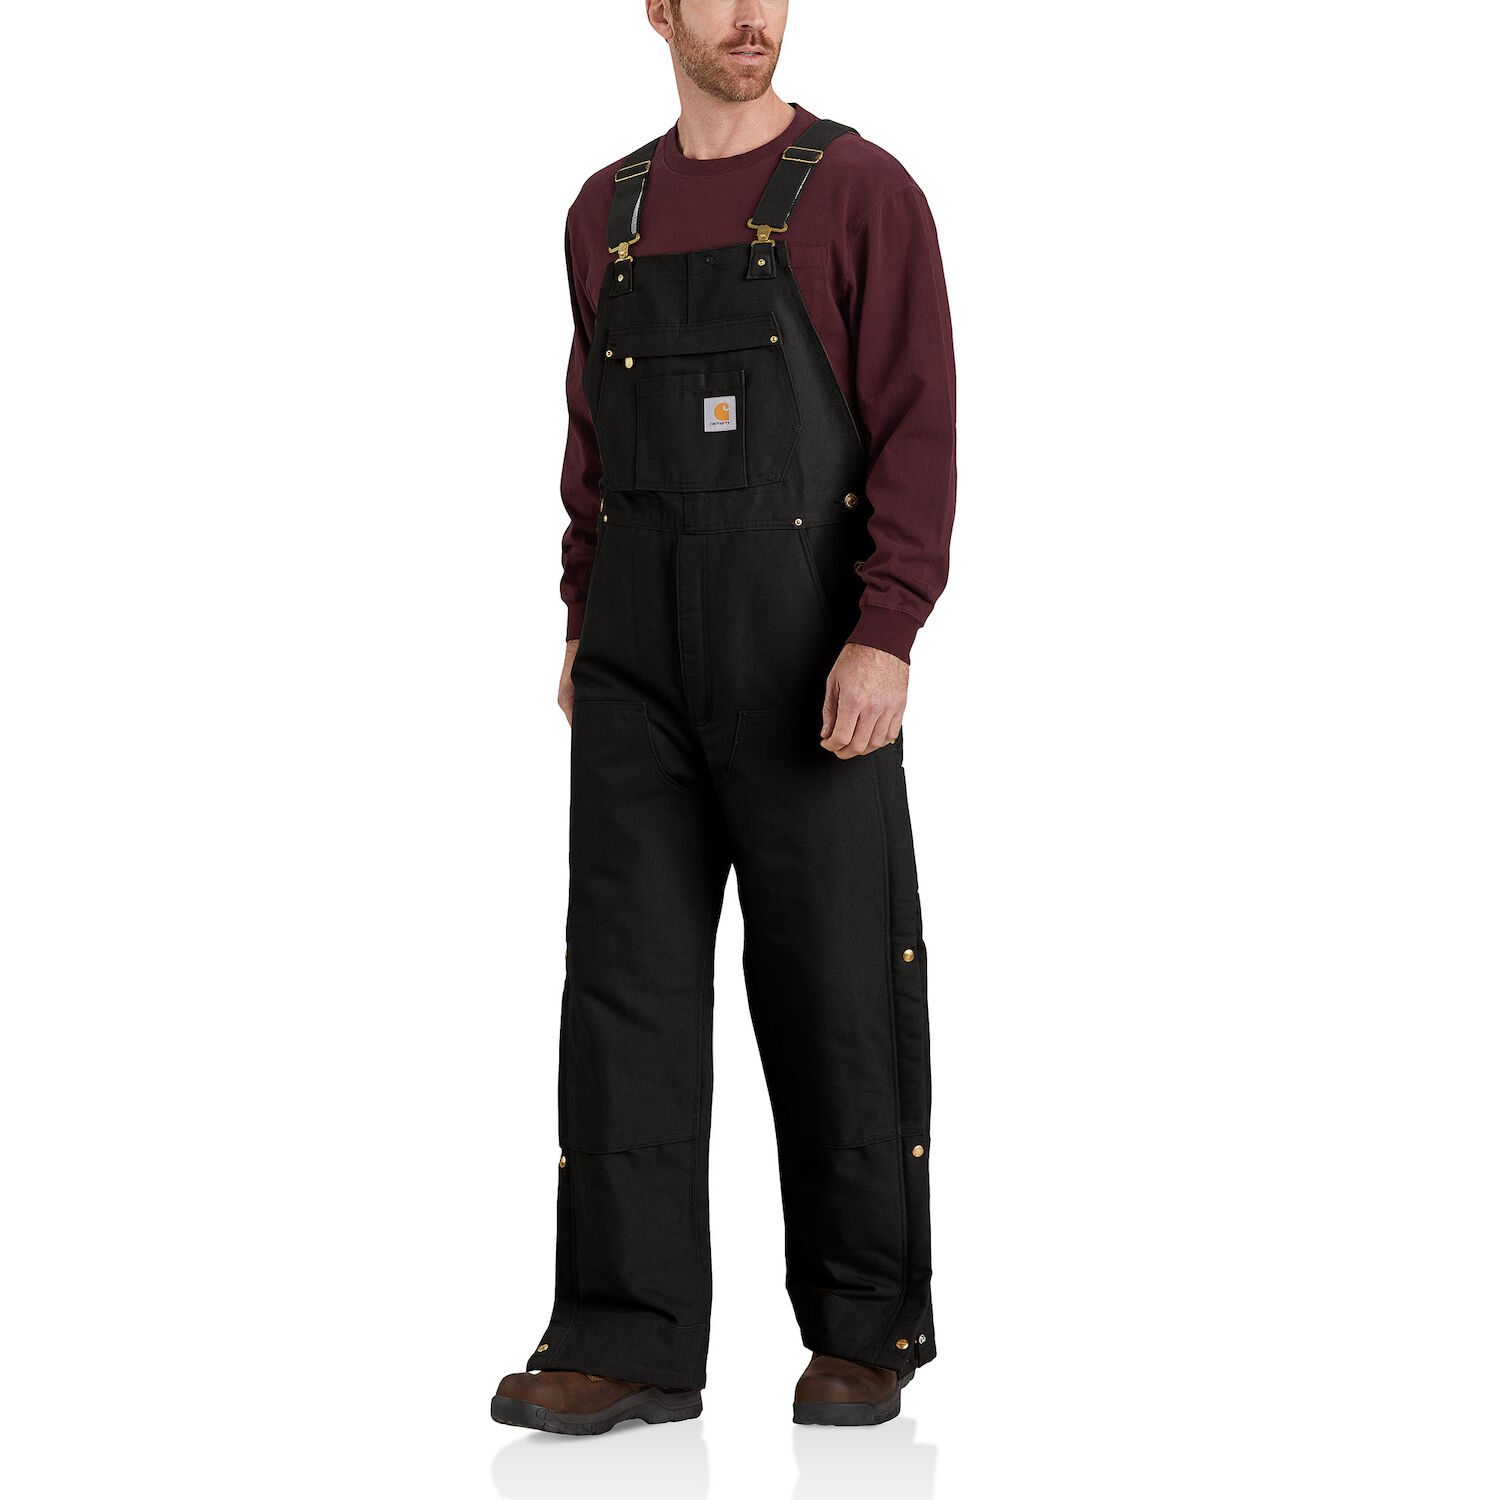 Carhartt Men's Loose Fit Firm Duck Insulated Bib Overall in Black -  Coveralls & Overalls, Carhartt